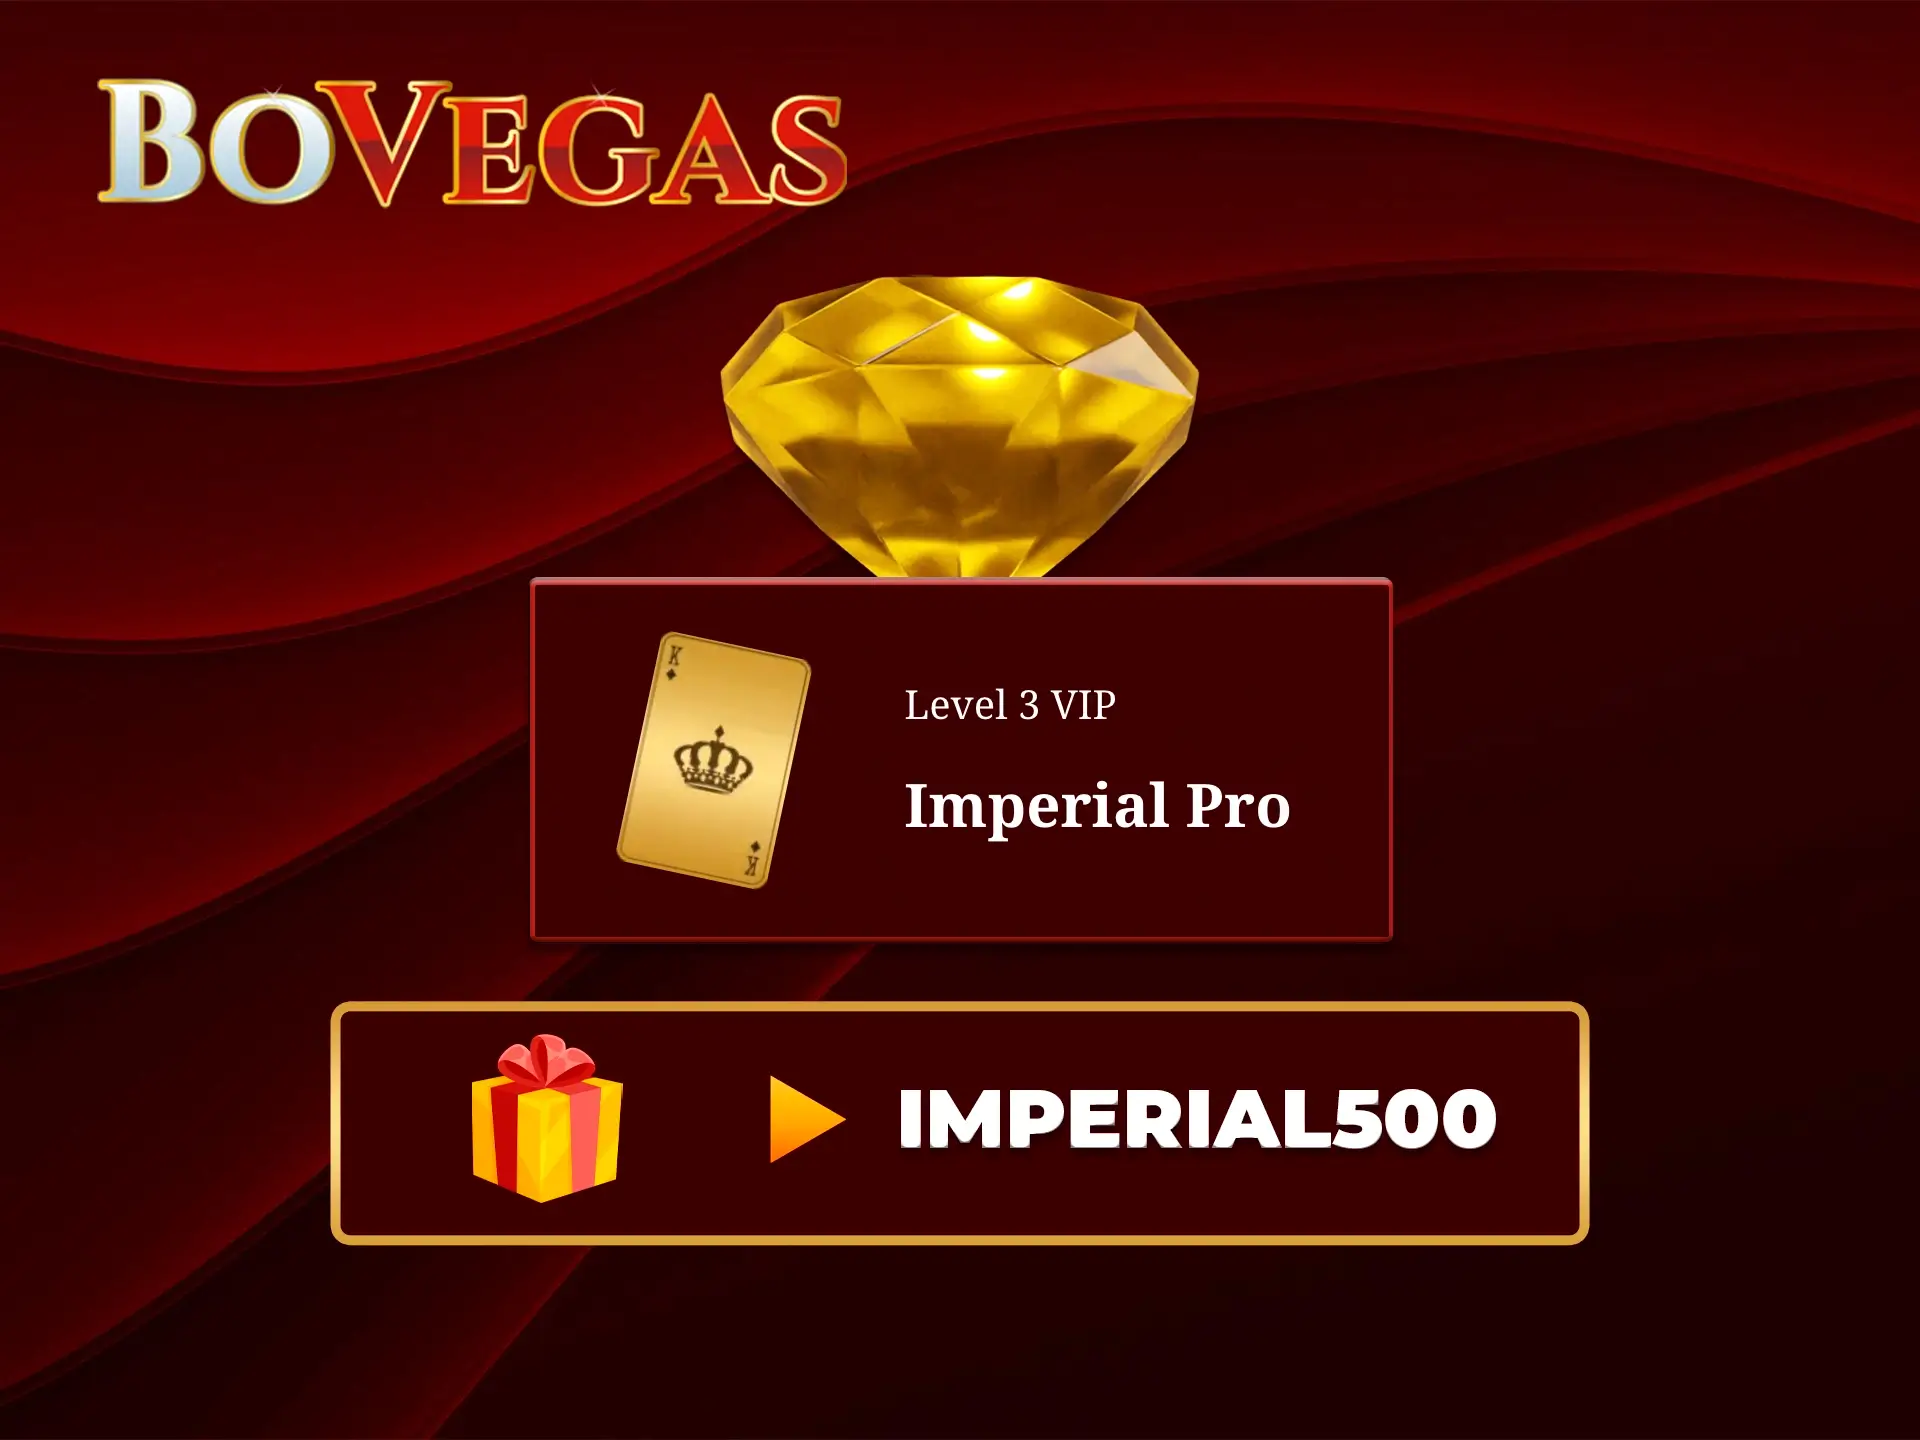 Your account level grows as well as your skills when playing at BoVegas Casino, opening up new opportunities for you.